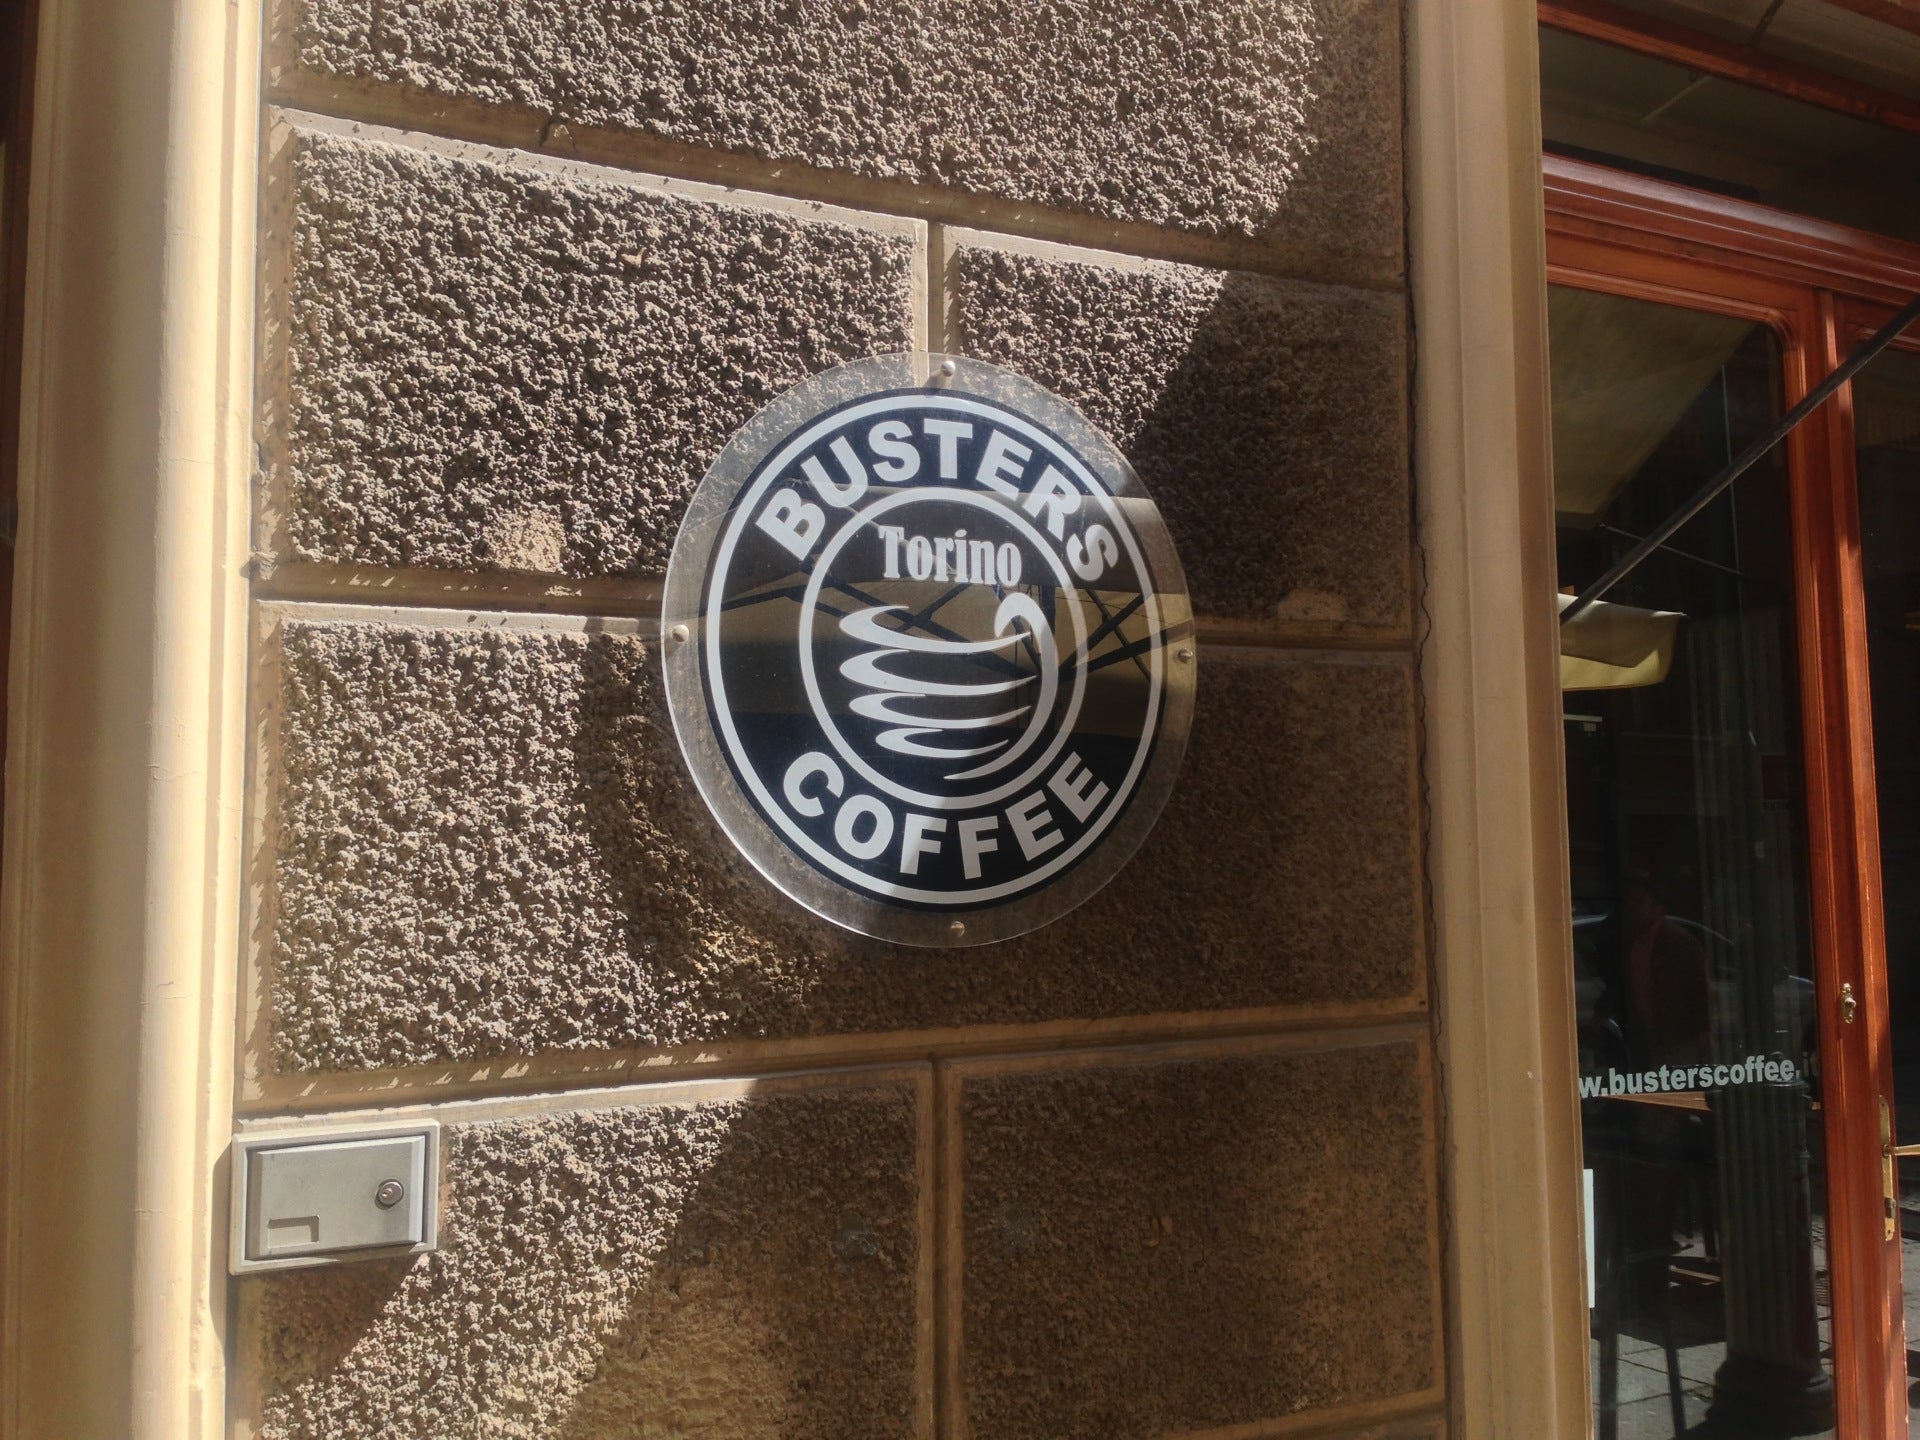 Busters Coffee